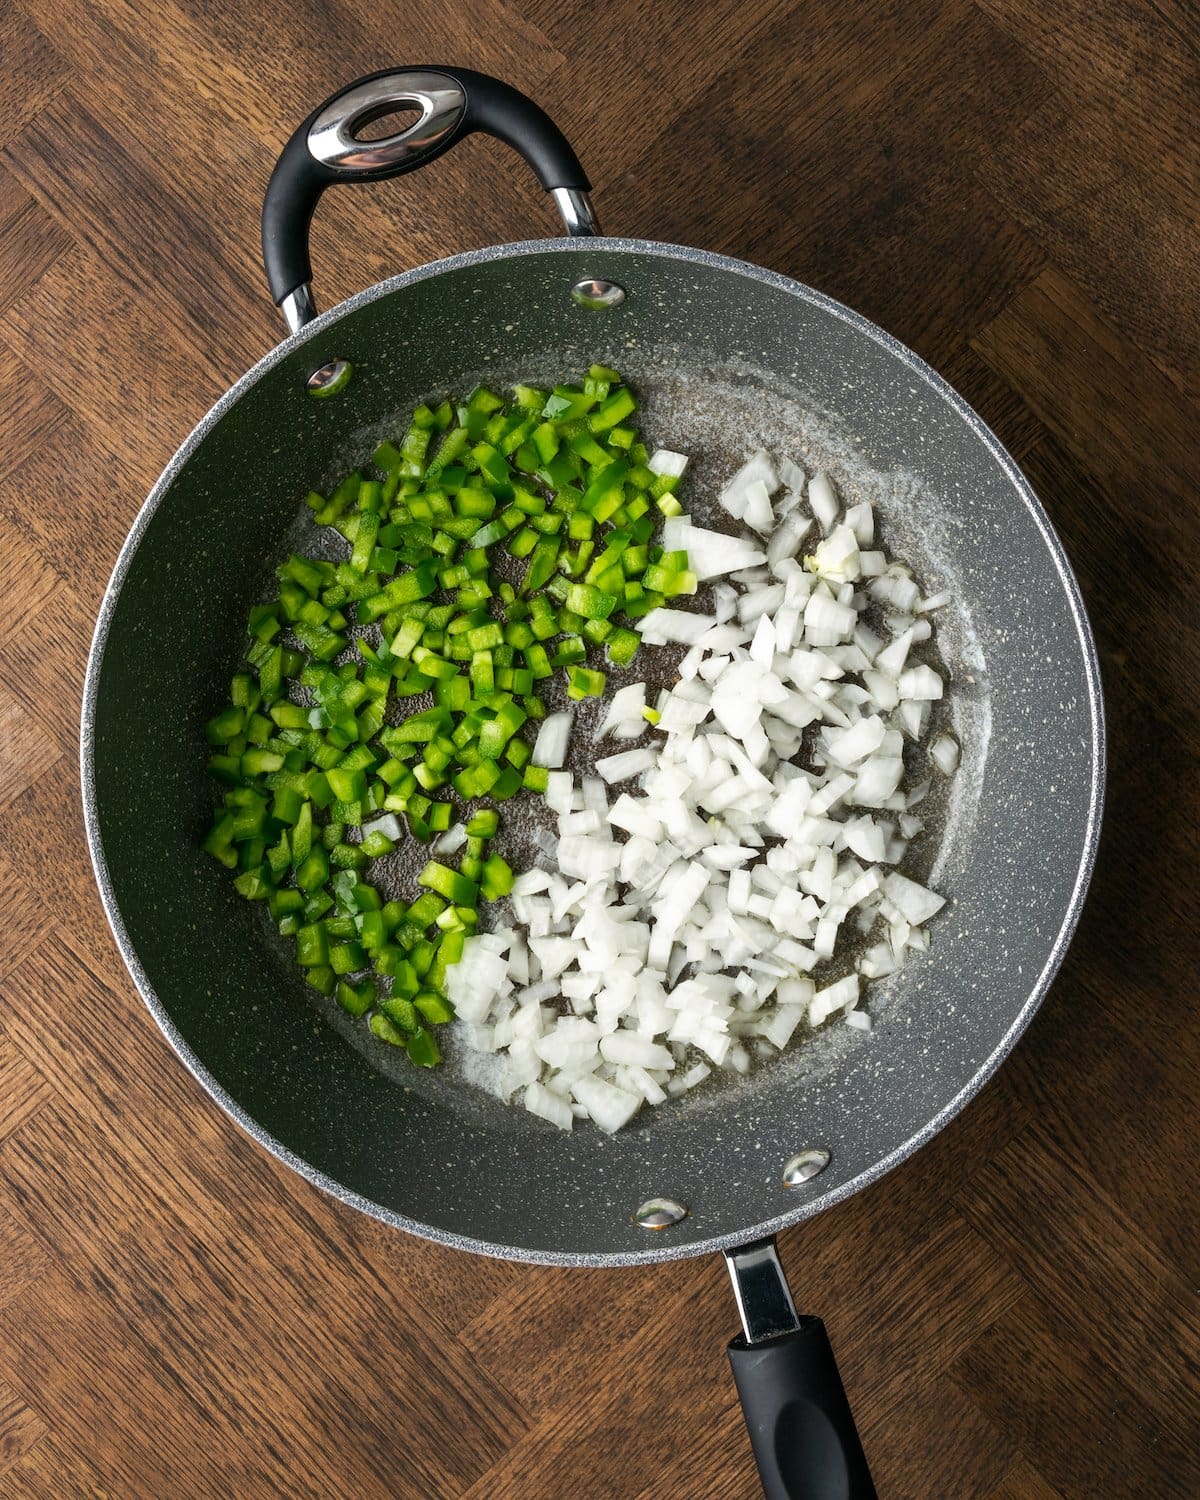 Diced onions and green bell peppers in a skillet.